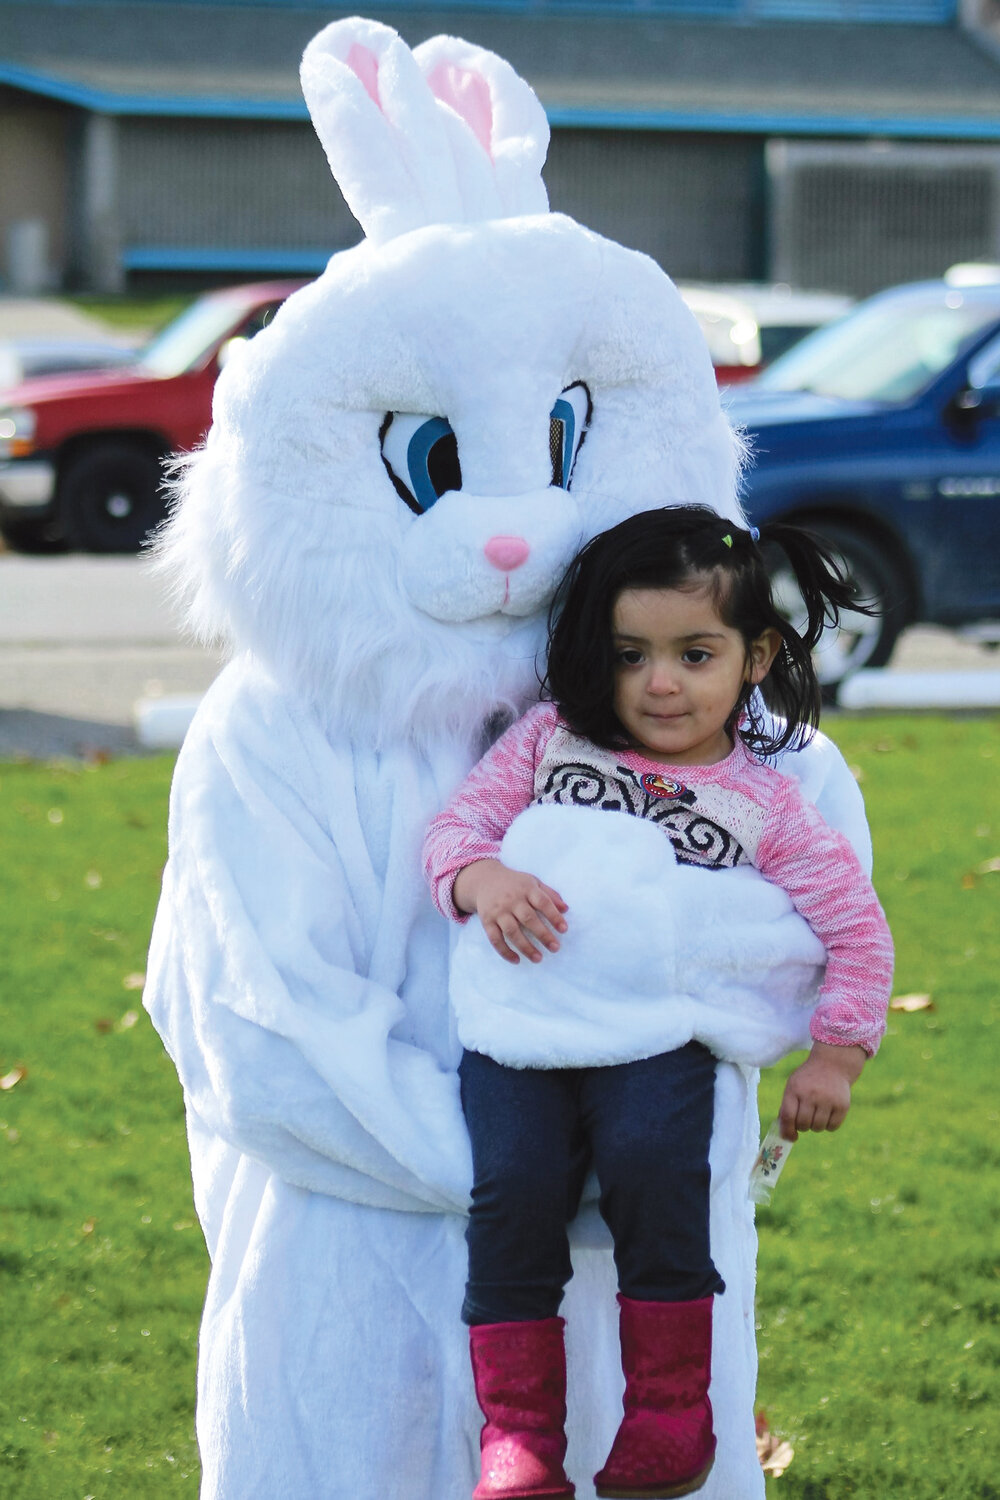 The Easter Bunny grabbed a prize of his own in two-year-old Miriam Garcia at the BBGC Egg Hunt.